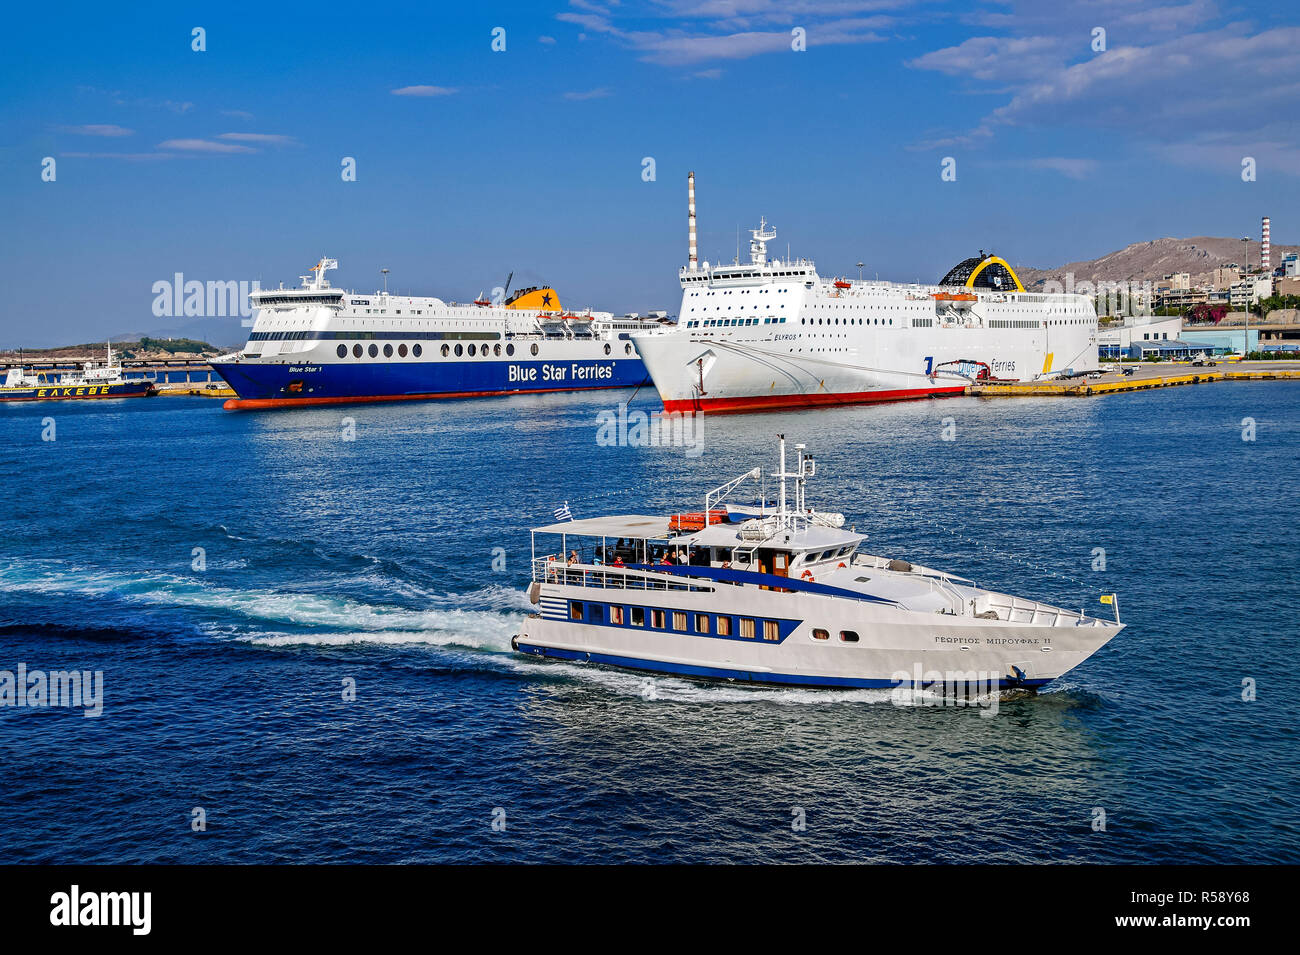 Broufas Vessels passenger ferry Georgios Mproufas II with Blue Star 1 &  Elyros port of Piraeus Athens Greece Europe Stock Photo